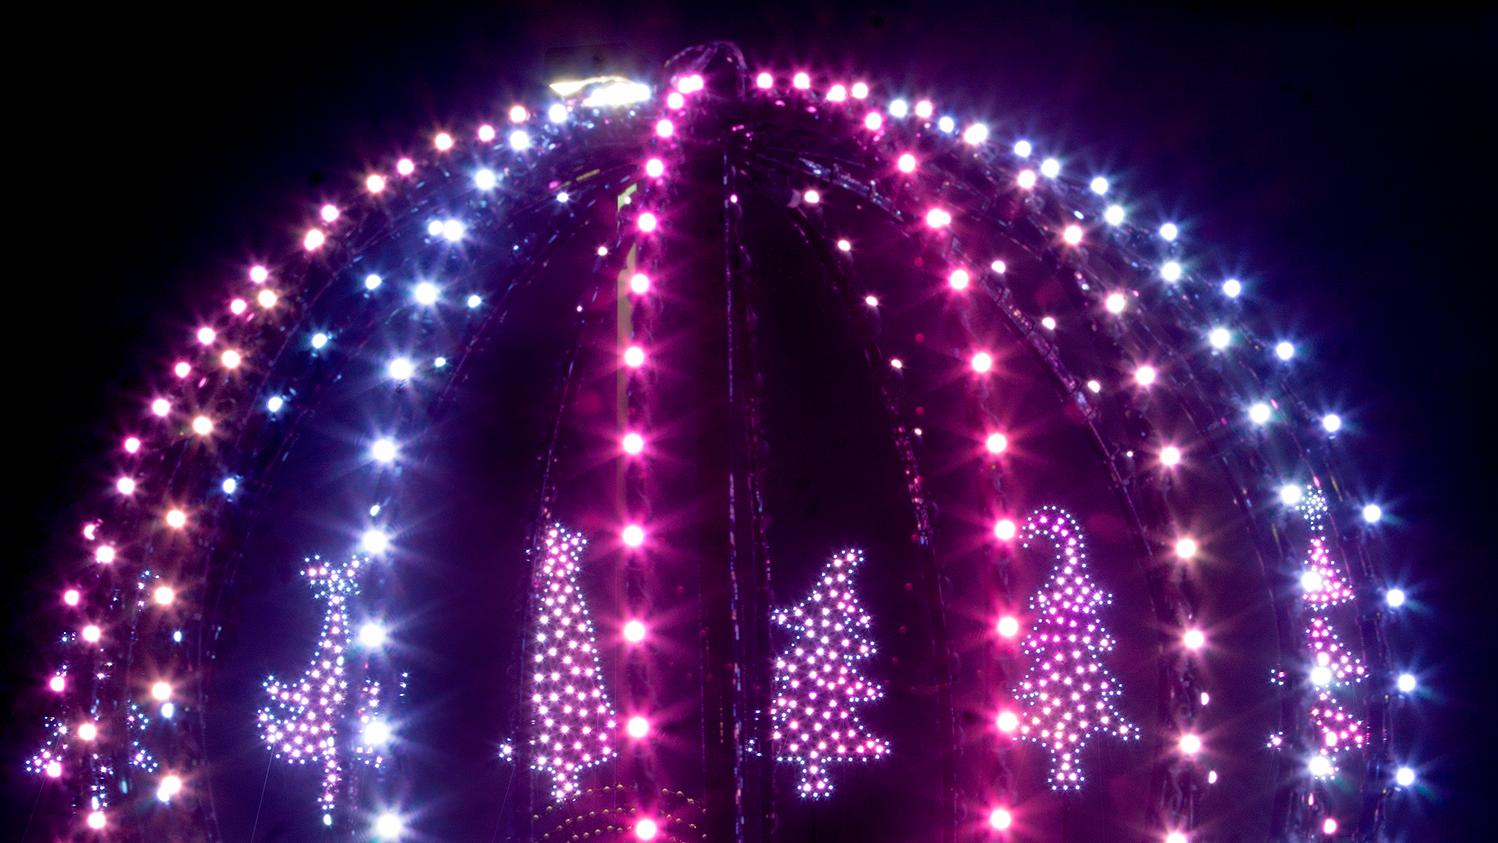 A dome glows purple and blue as part of Holiday Lights on Farmstead Lane.